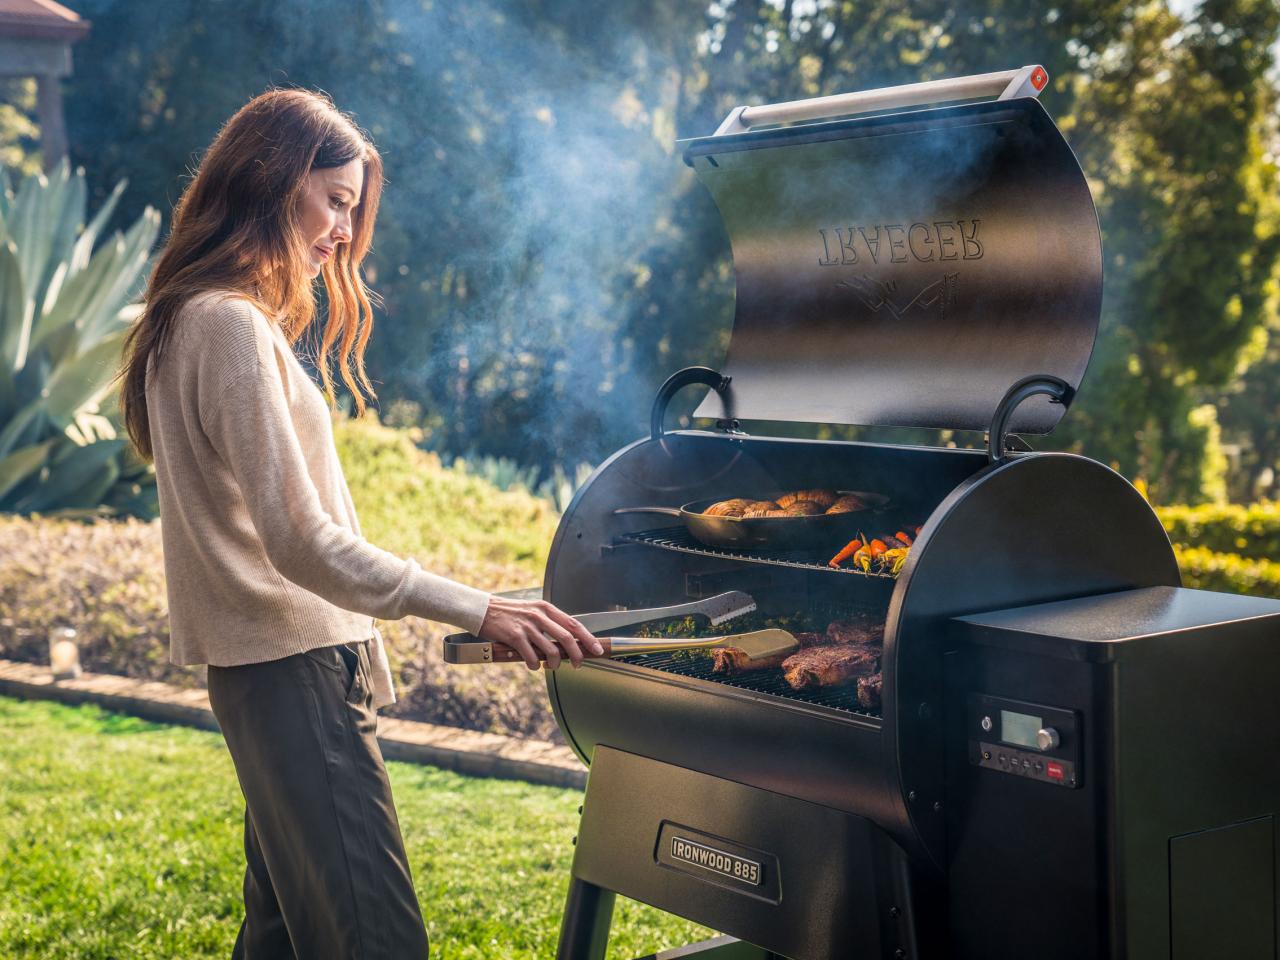 The 9 Best BBQ Gift Ideas - Gifts for Meat Smokers - A Pinch of Adventure